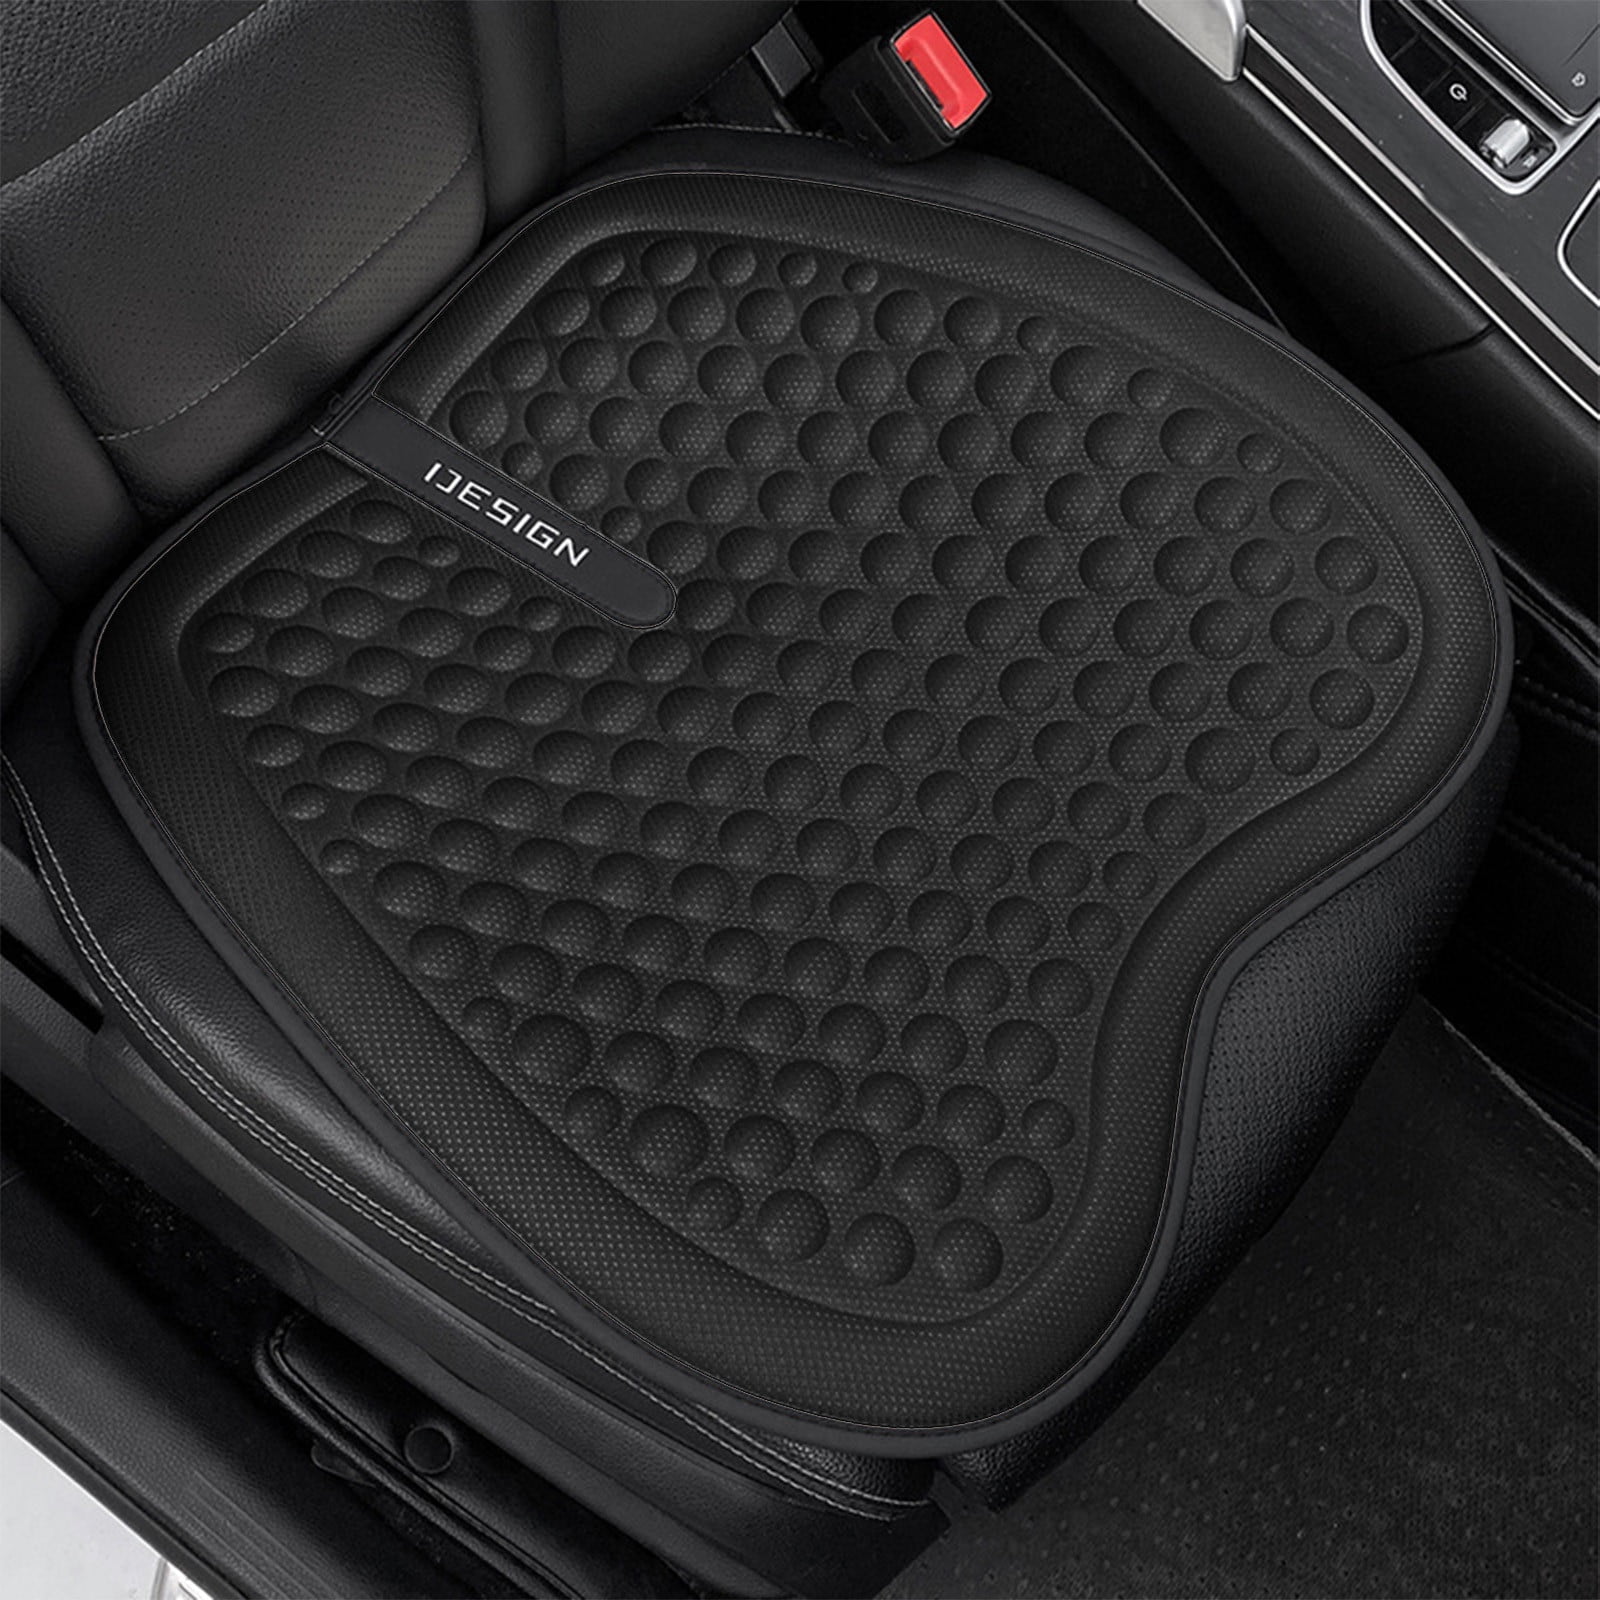 Driver Seat Cushion Nonwoven Seat Cushion For Truck Driver Car Cushion  Summer Protection Pad Cool Breathing Seat Cover For Most - AliExpress